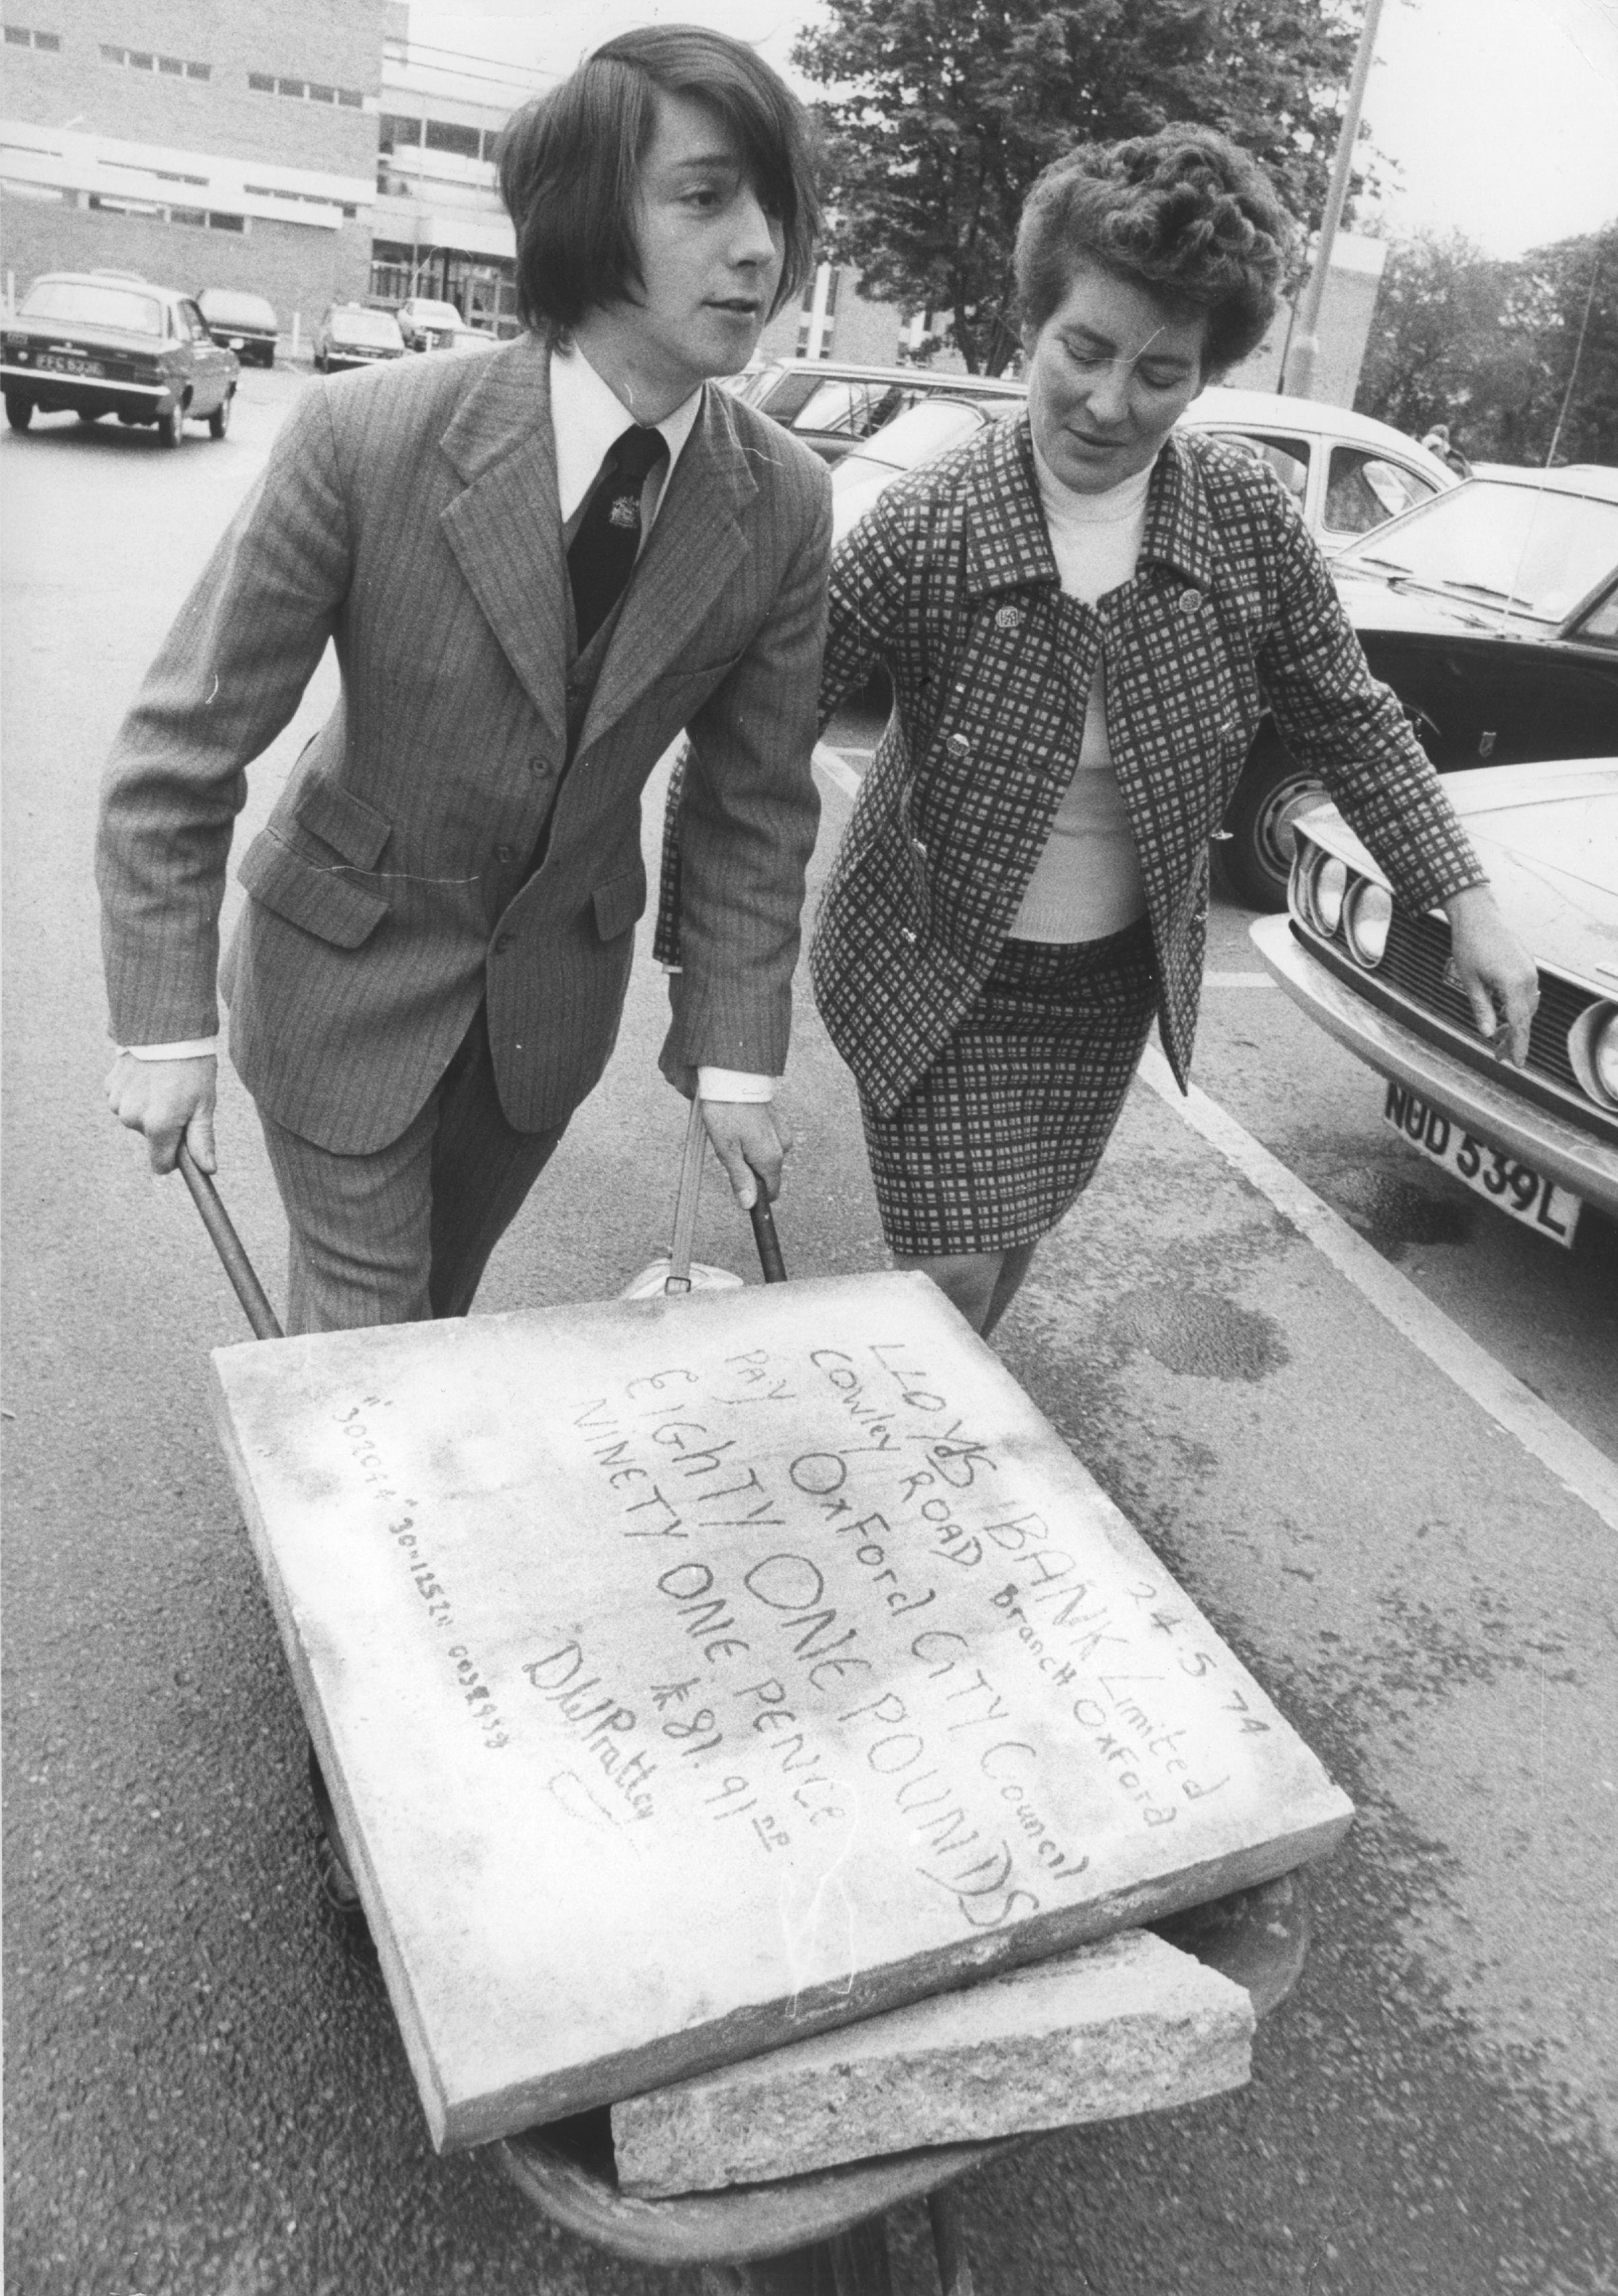 In 1974 councillors Margaret Butler and Dennis Pratley delivered a paing stone cheque to the bank to protest against the cost of paving work in Cornmarket Street